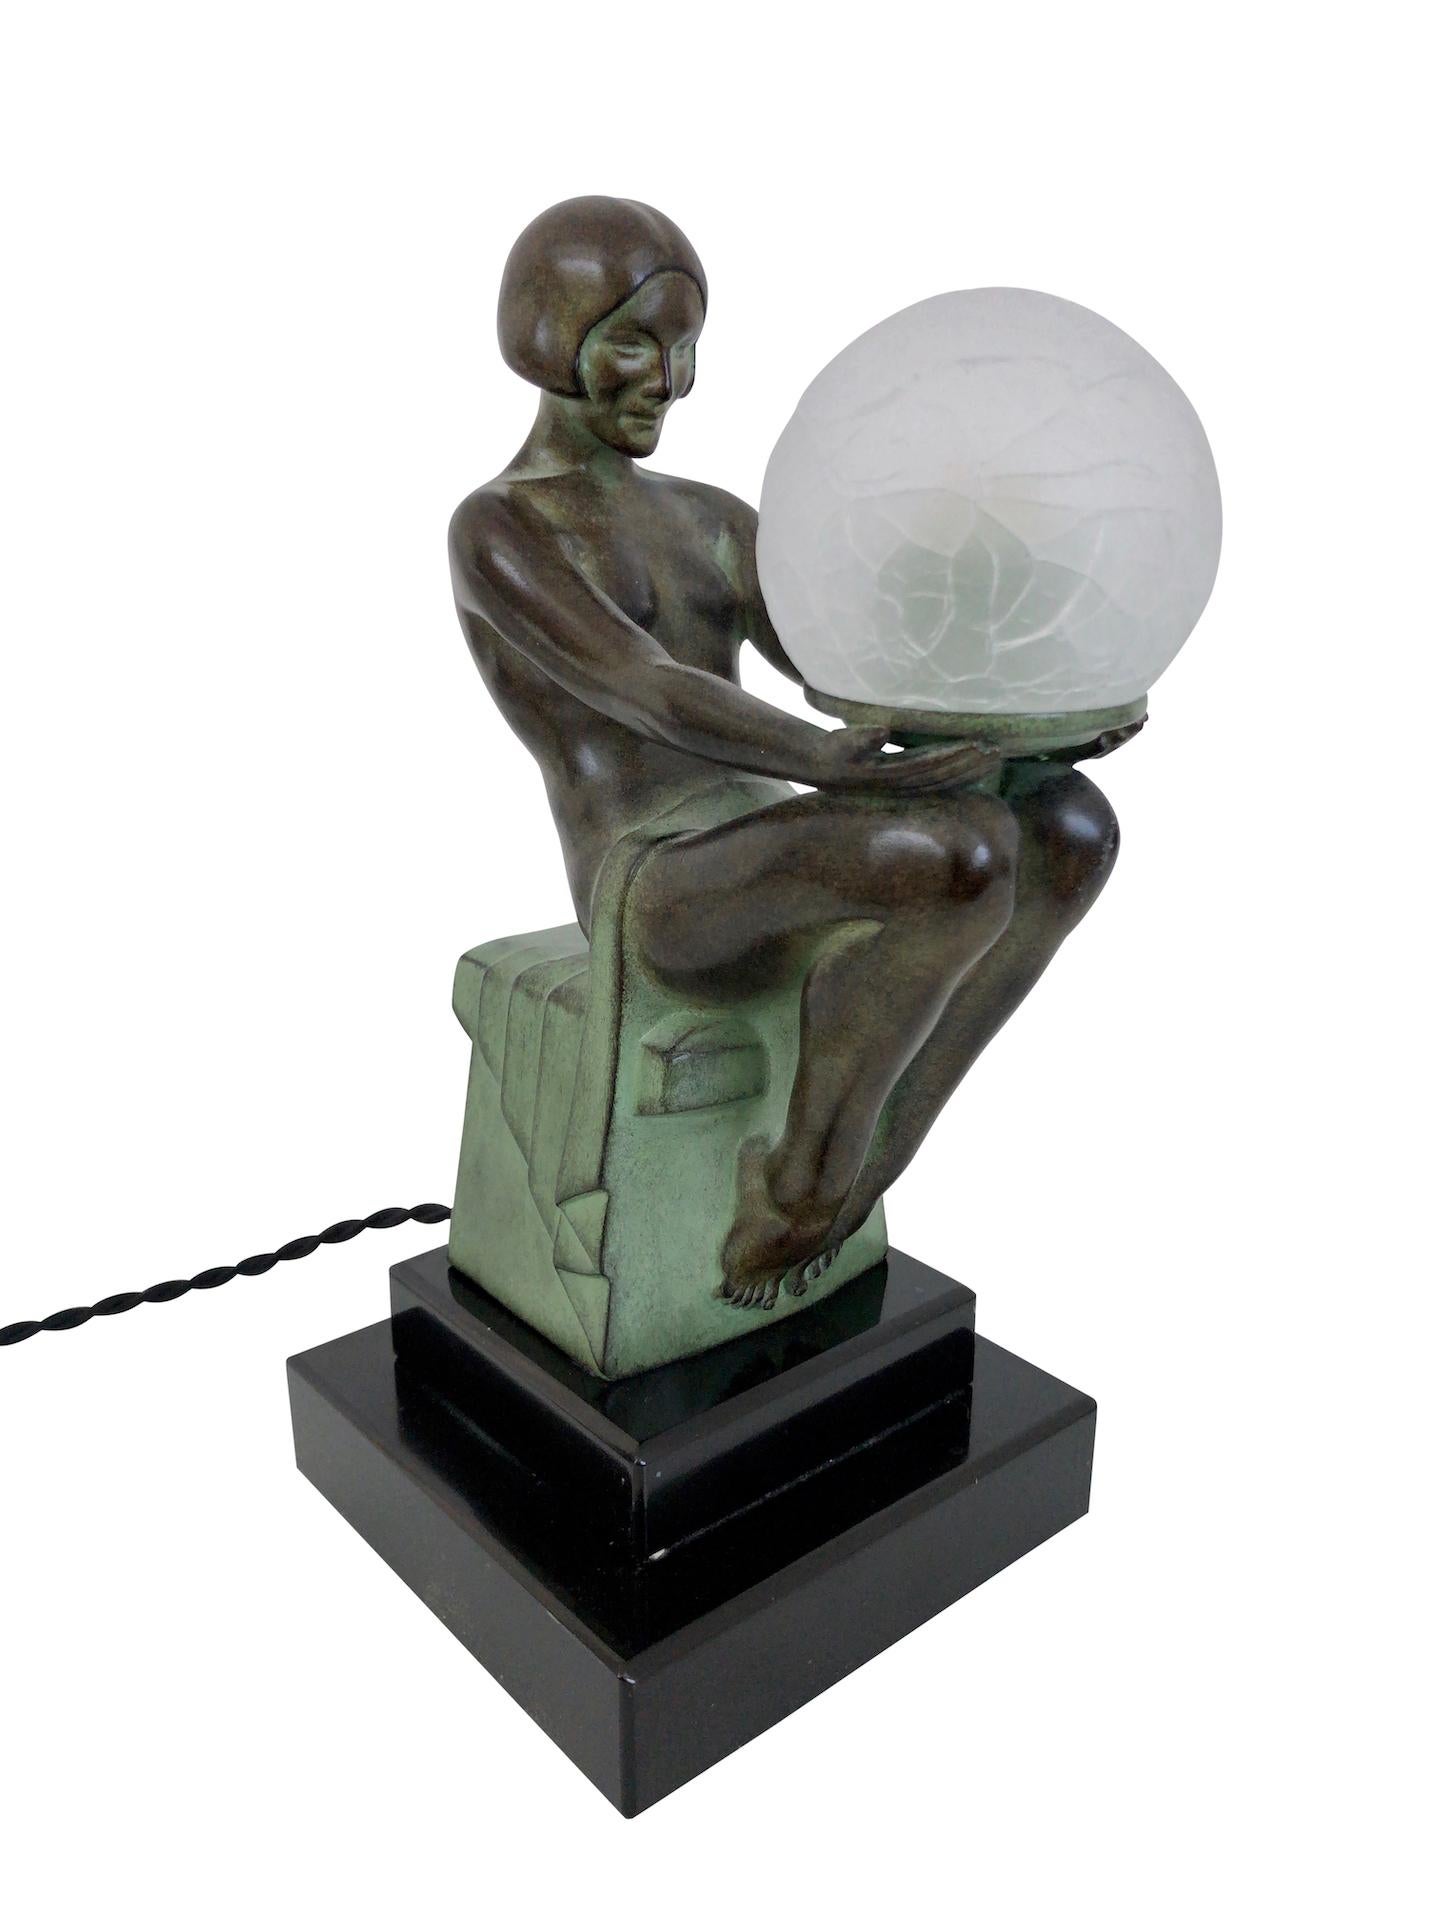 Delassement Lumineux French Art Deco Style Nude Sculpture Lamp by Max Le Verrier 9